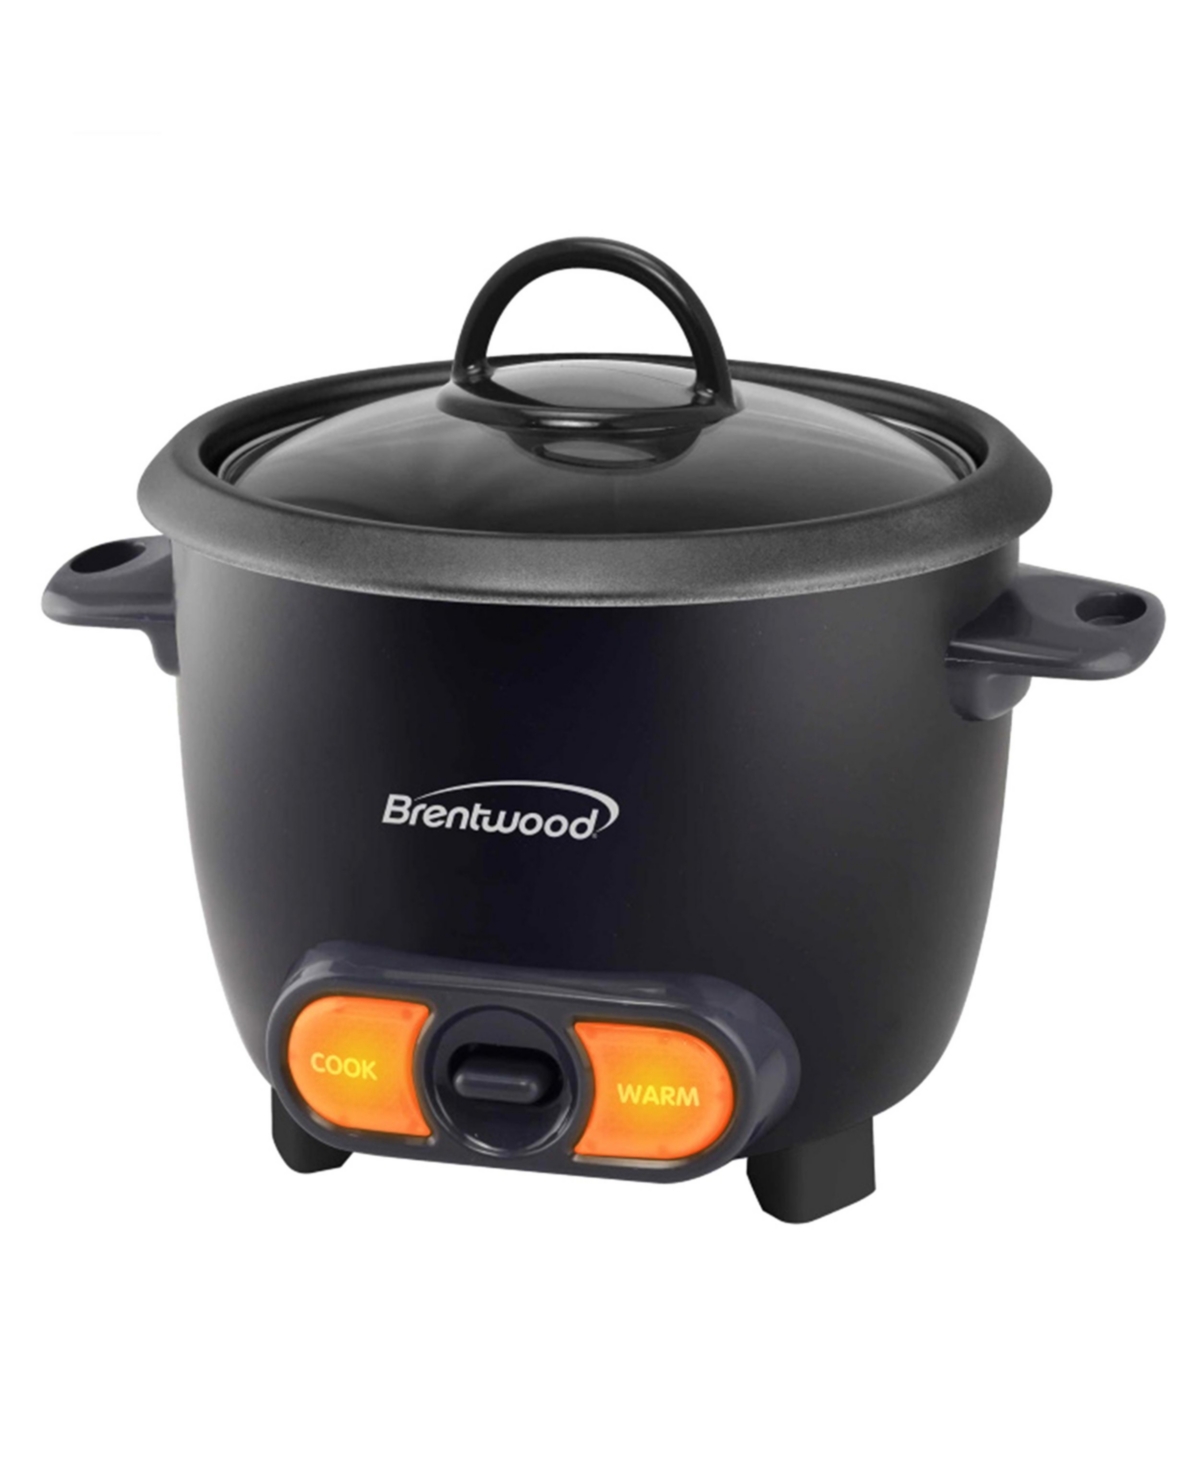 Brentwood 3 Cup Uncooked/6 Cup Cooked Non Stick Rice Cooker in Black - Black